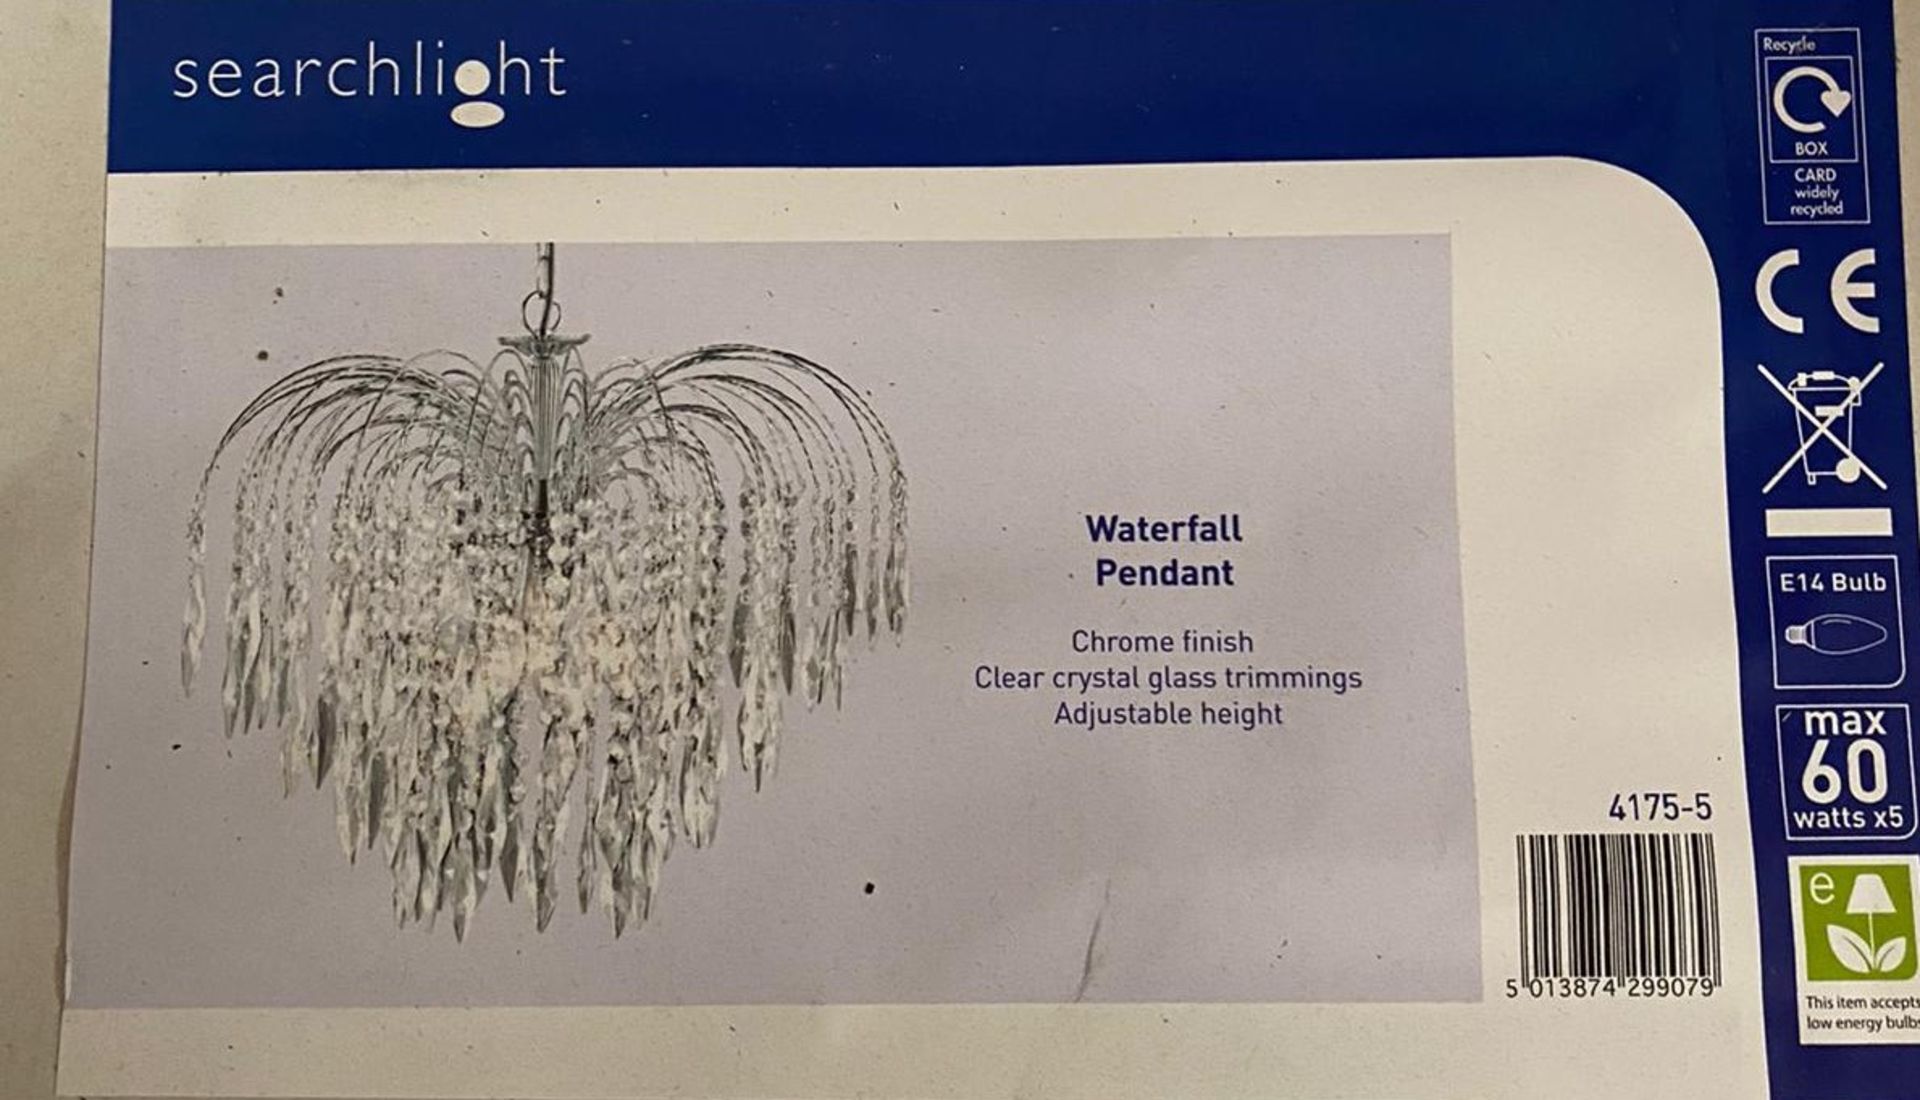 1 x Searchlight Waterfall Pendant in chrome - Ref: 4175-5 - New and Boxed - RRP: £500.00